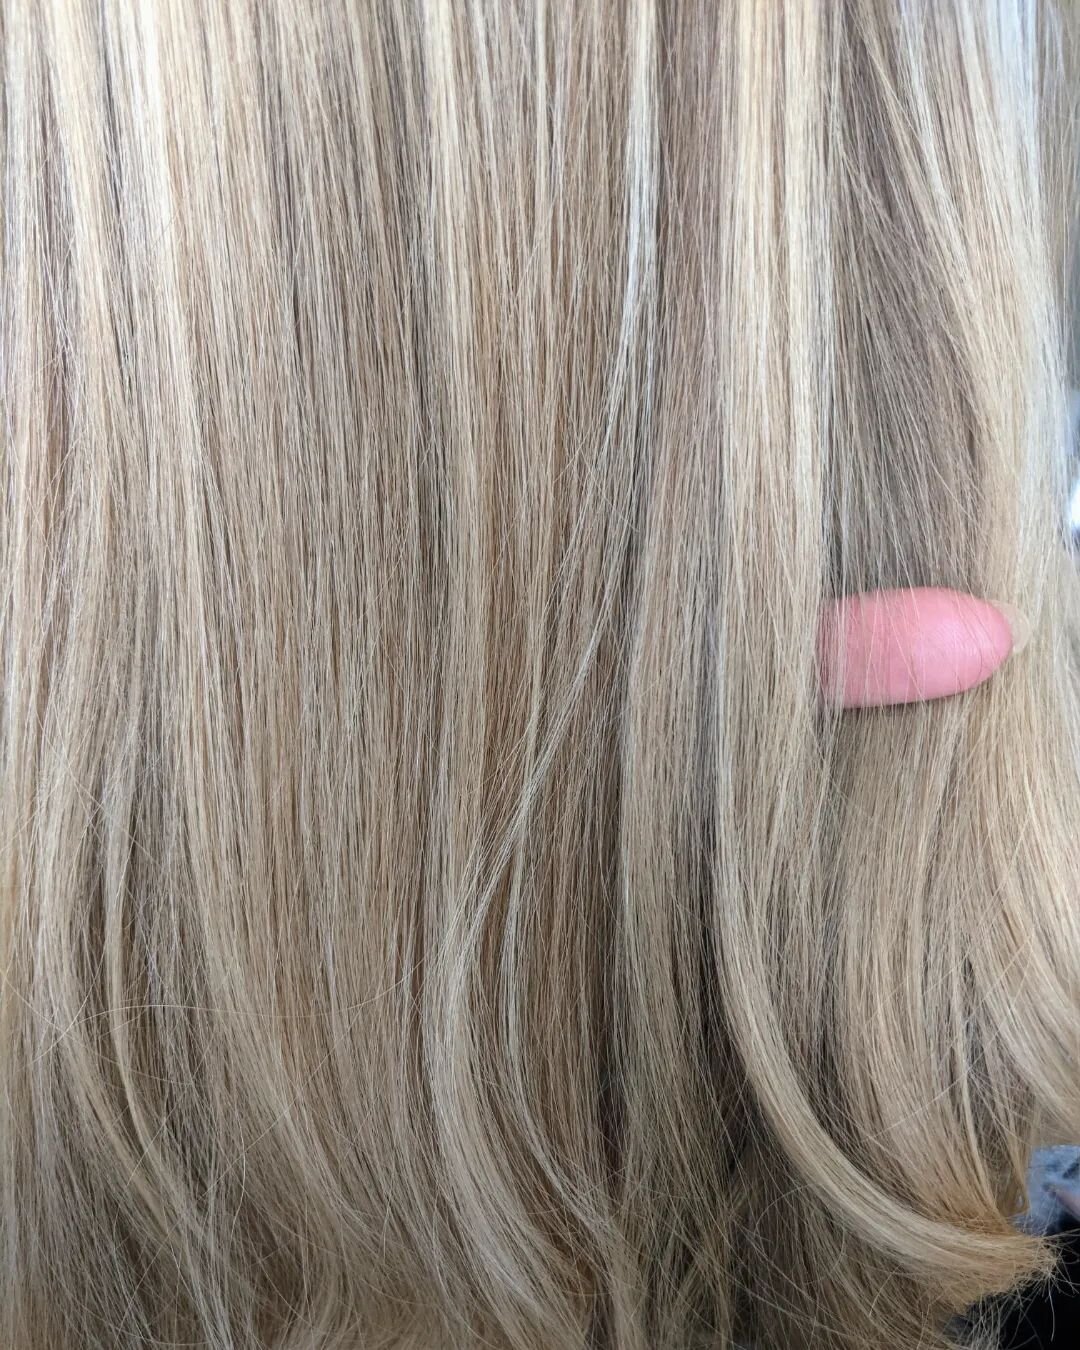 .
&bull; Healthy Hair Movement &bull;
.
.
Maintaining the integrity of hair even if colored #balayage 
.
#ilesformula #redkencolorist #travelinghairstylist #yourhairbutbetter #brunettes #honeyblonde #chocolate #summerdays #dessange #highlights #augus